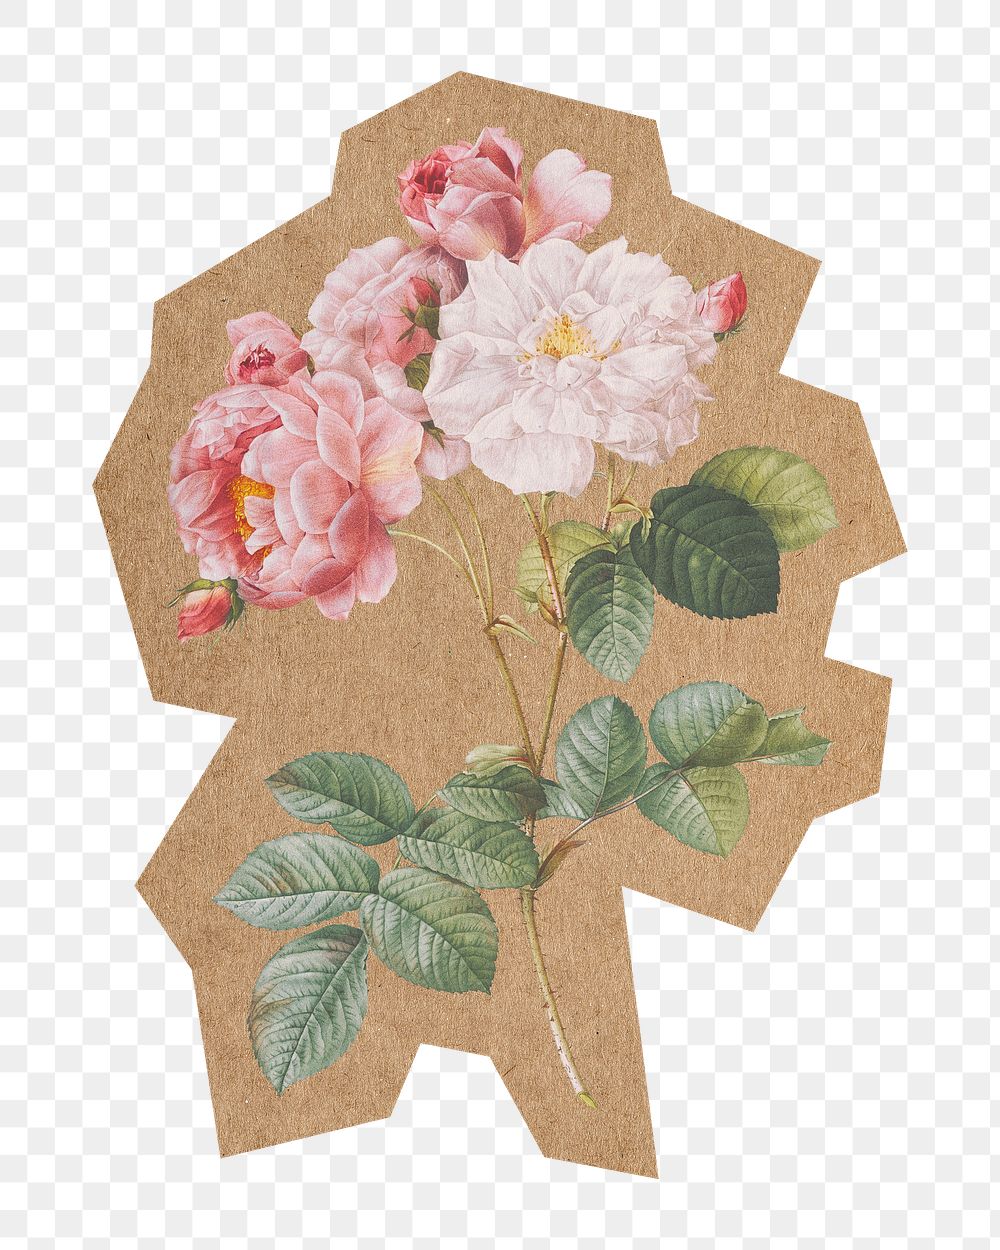 Blooming pink rosebush png, cut out paper element, transparent background. Artwork from Pierre Joseph Redouté remixed by…